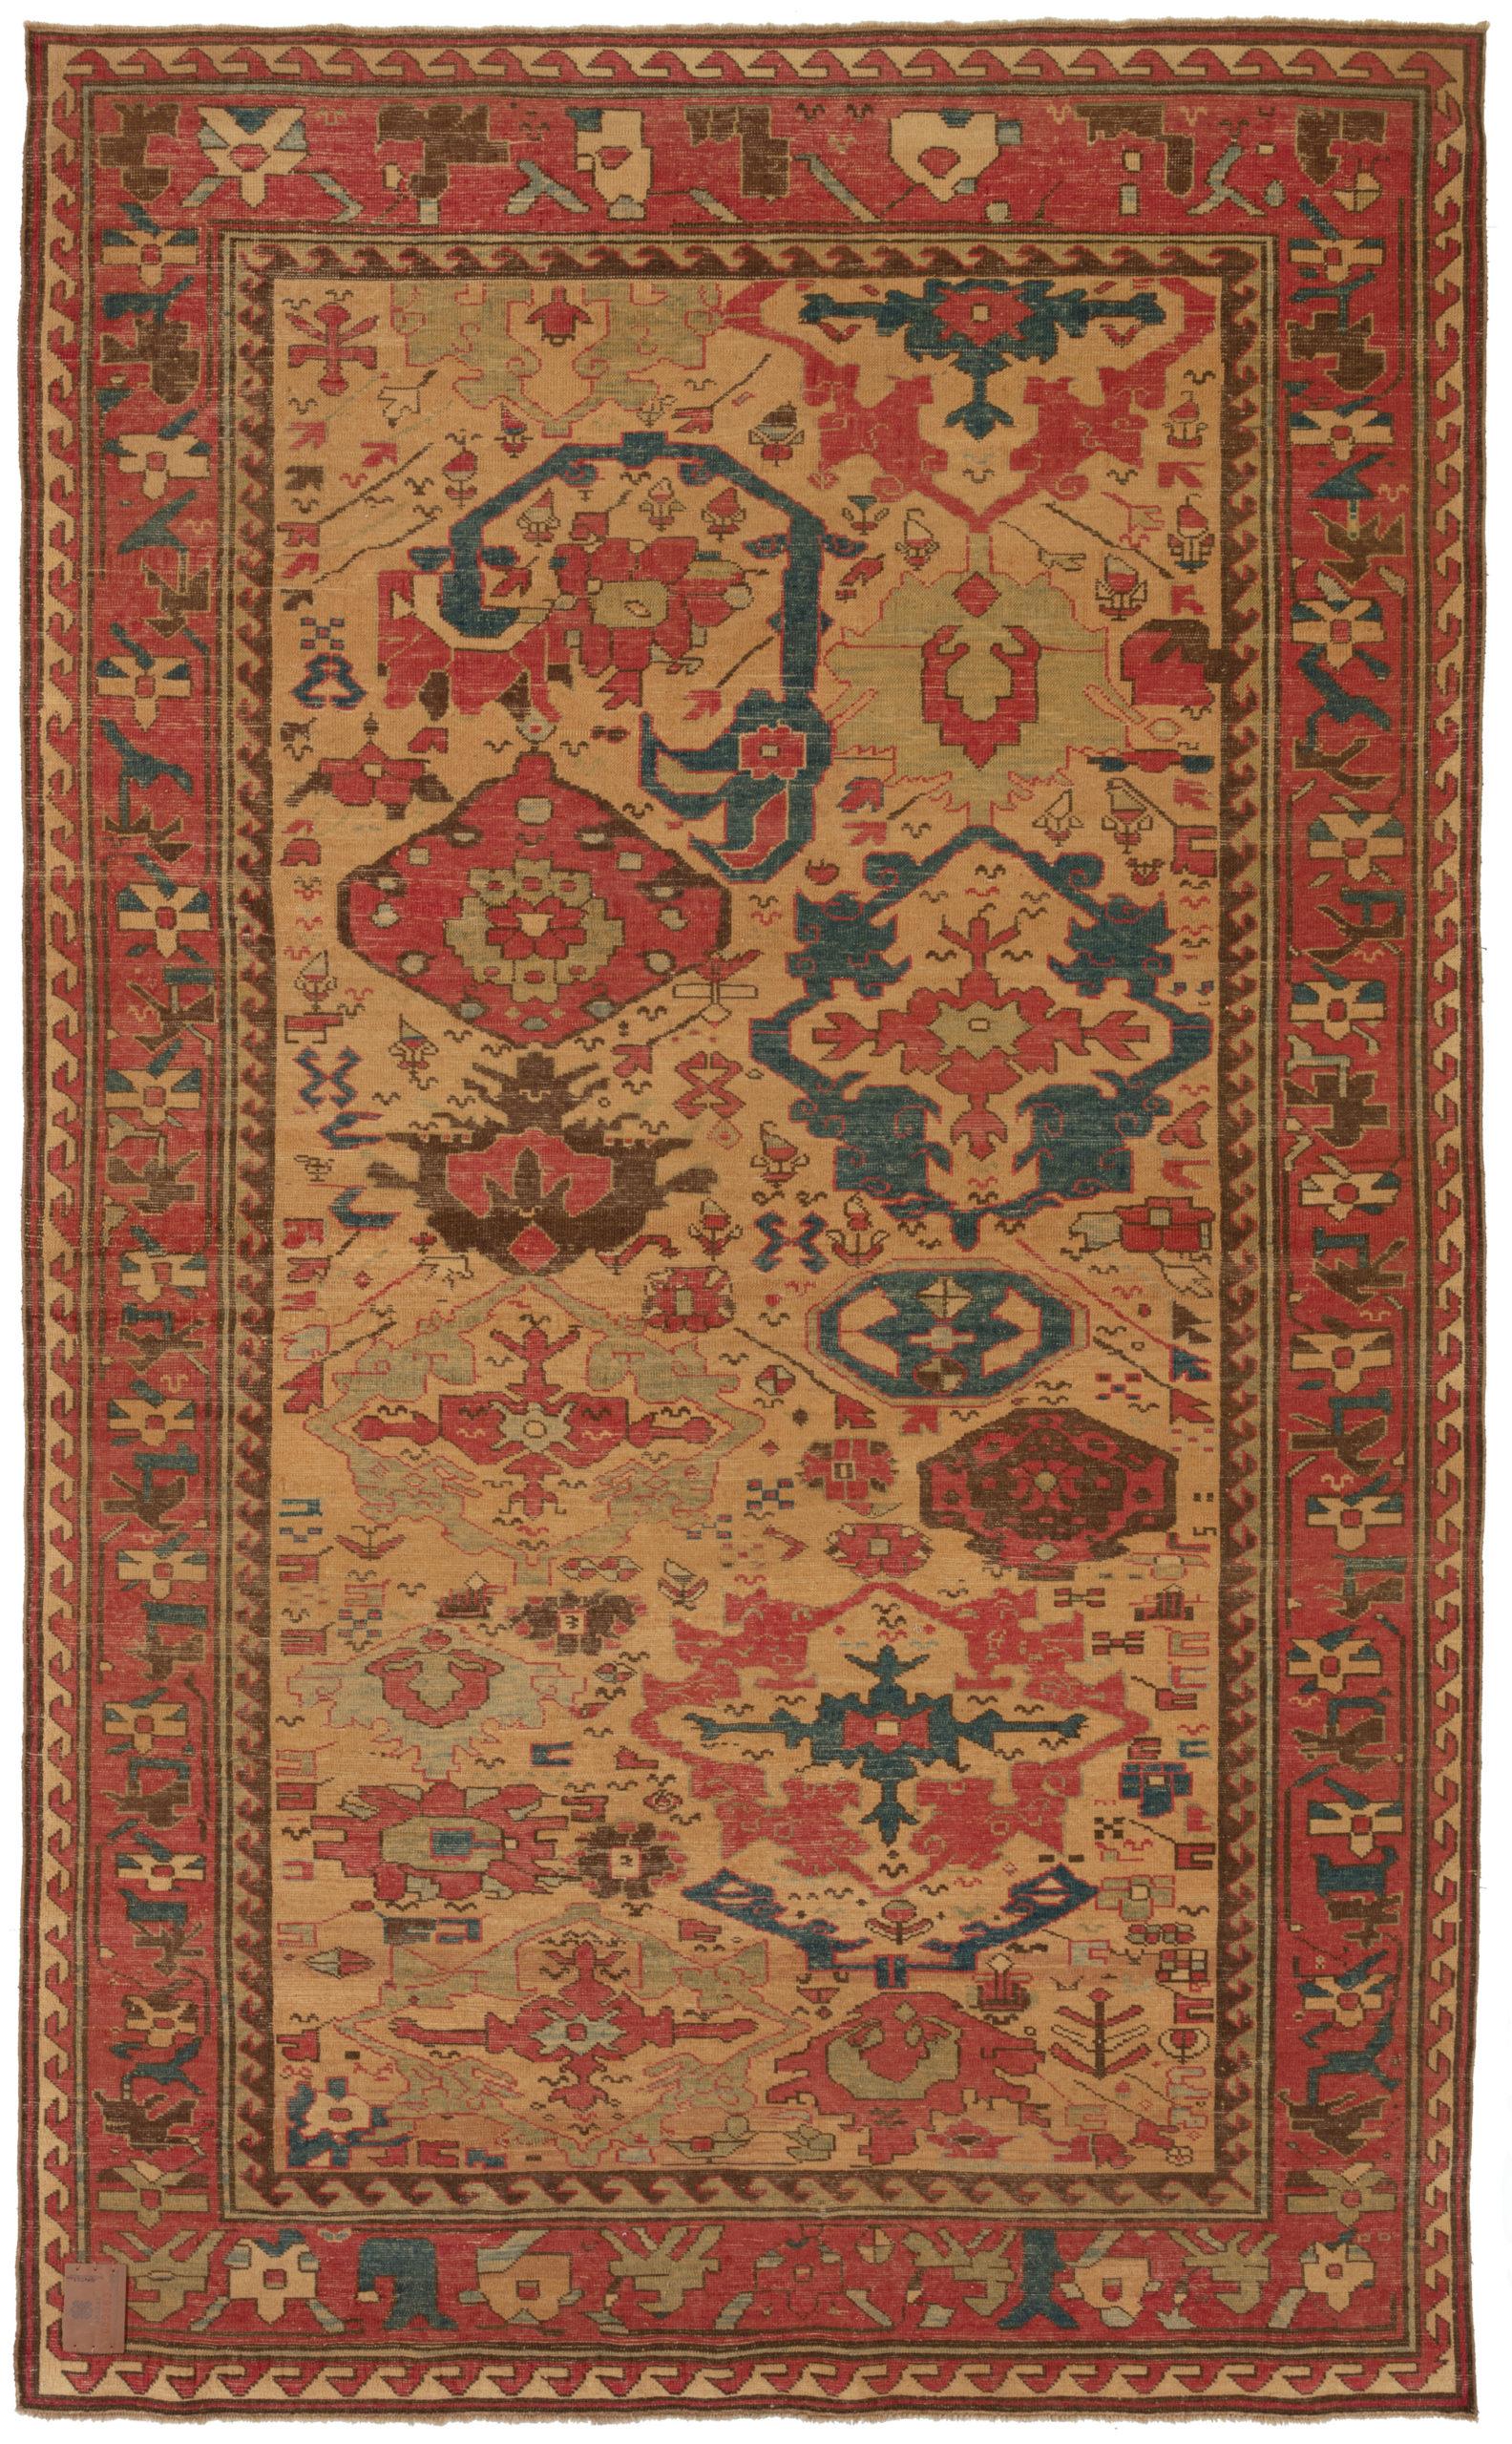 The design source of the rug comes from the book Orient Star – A Carpet Collection, E. Heinrich Kirchheim, Hali Publications Ltd, 1993 nr.28. This is a Harshang design rug with palmettes from the early 19th century, Azerbaijan region, Eastern